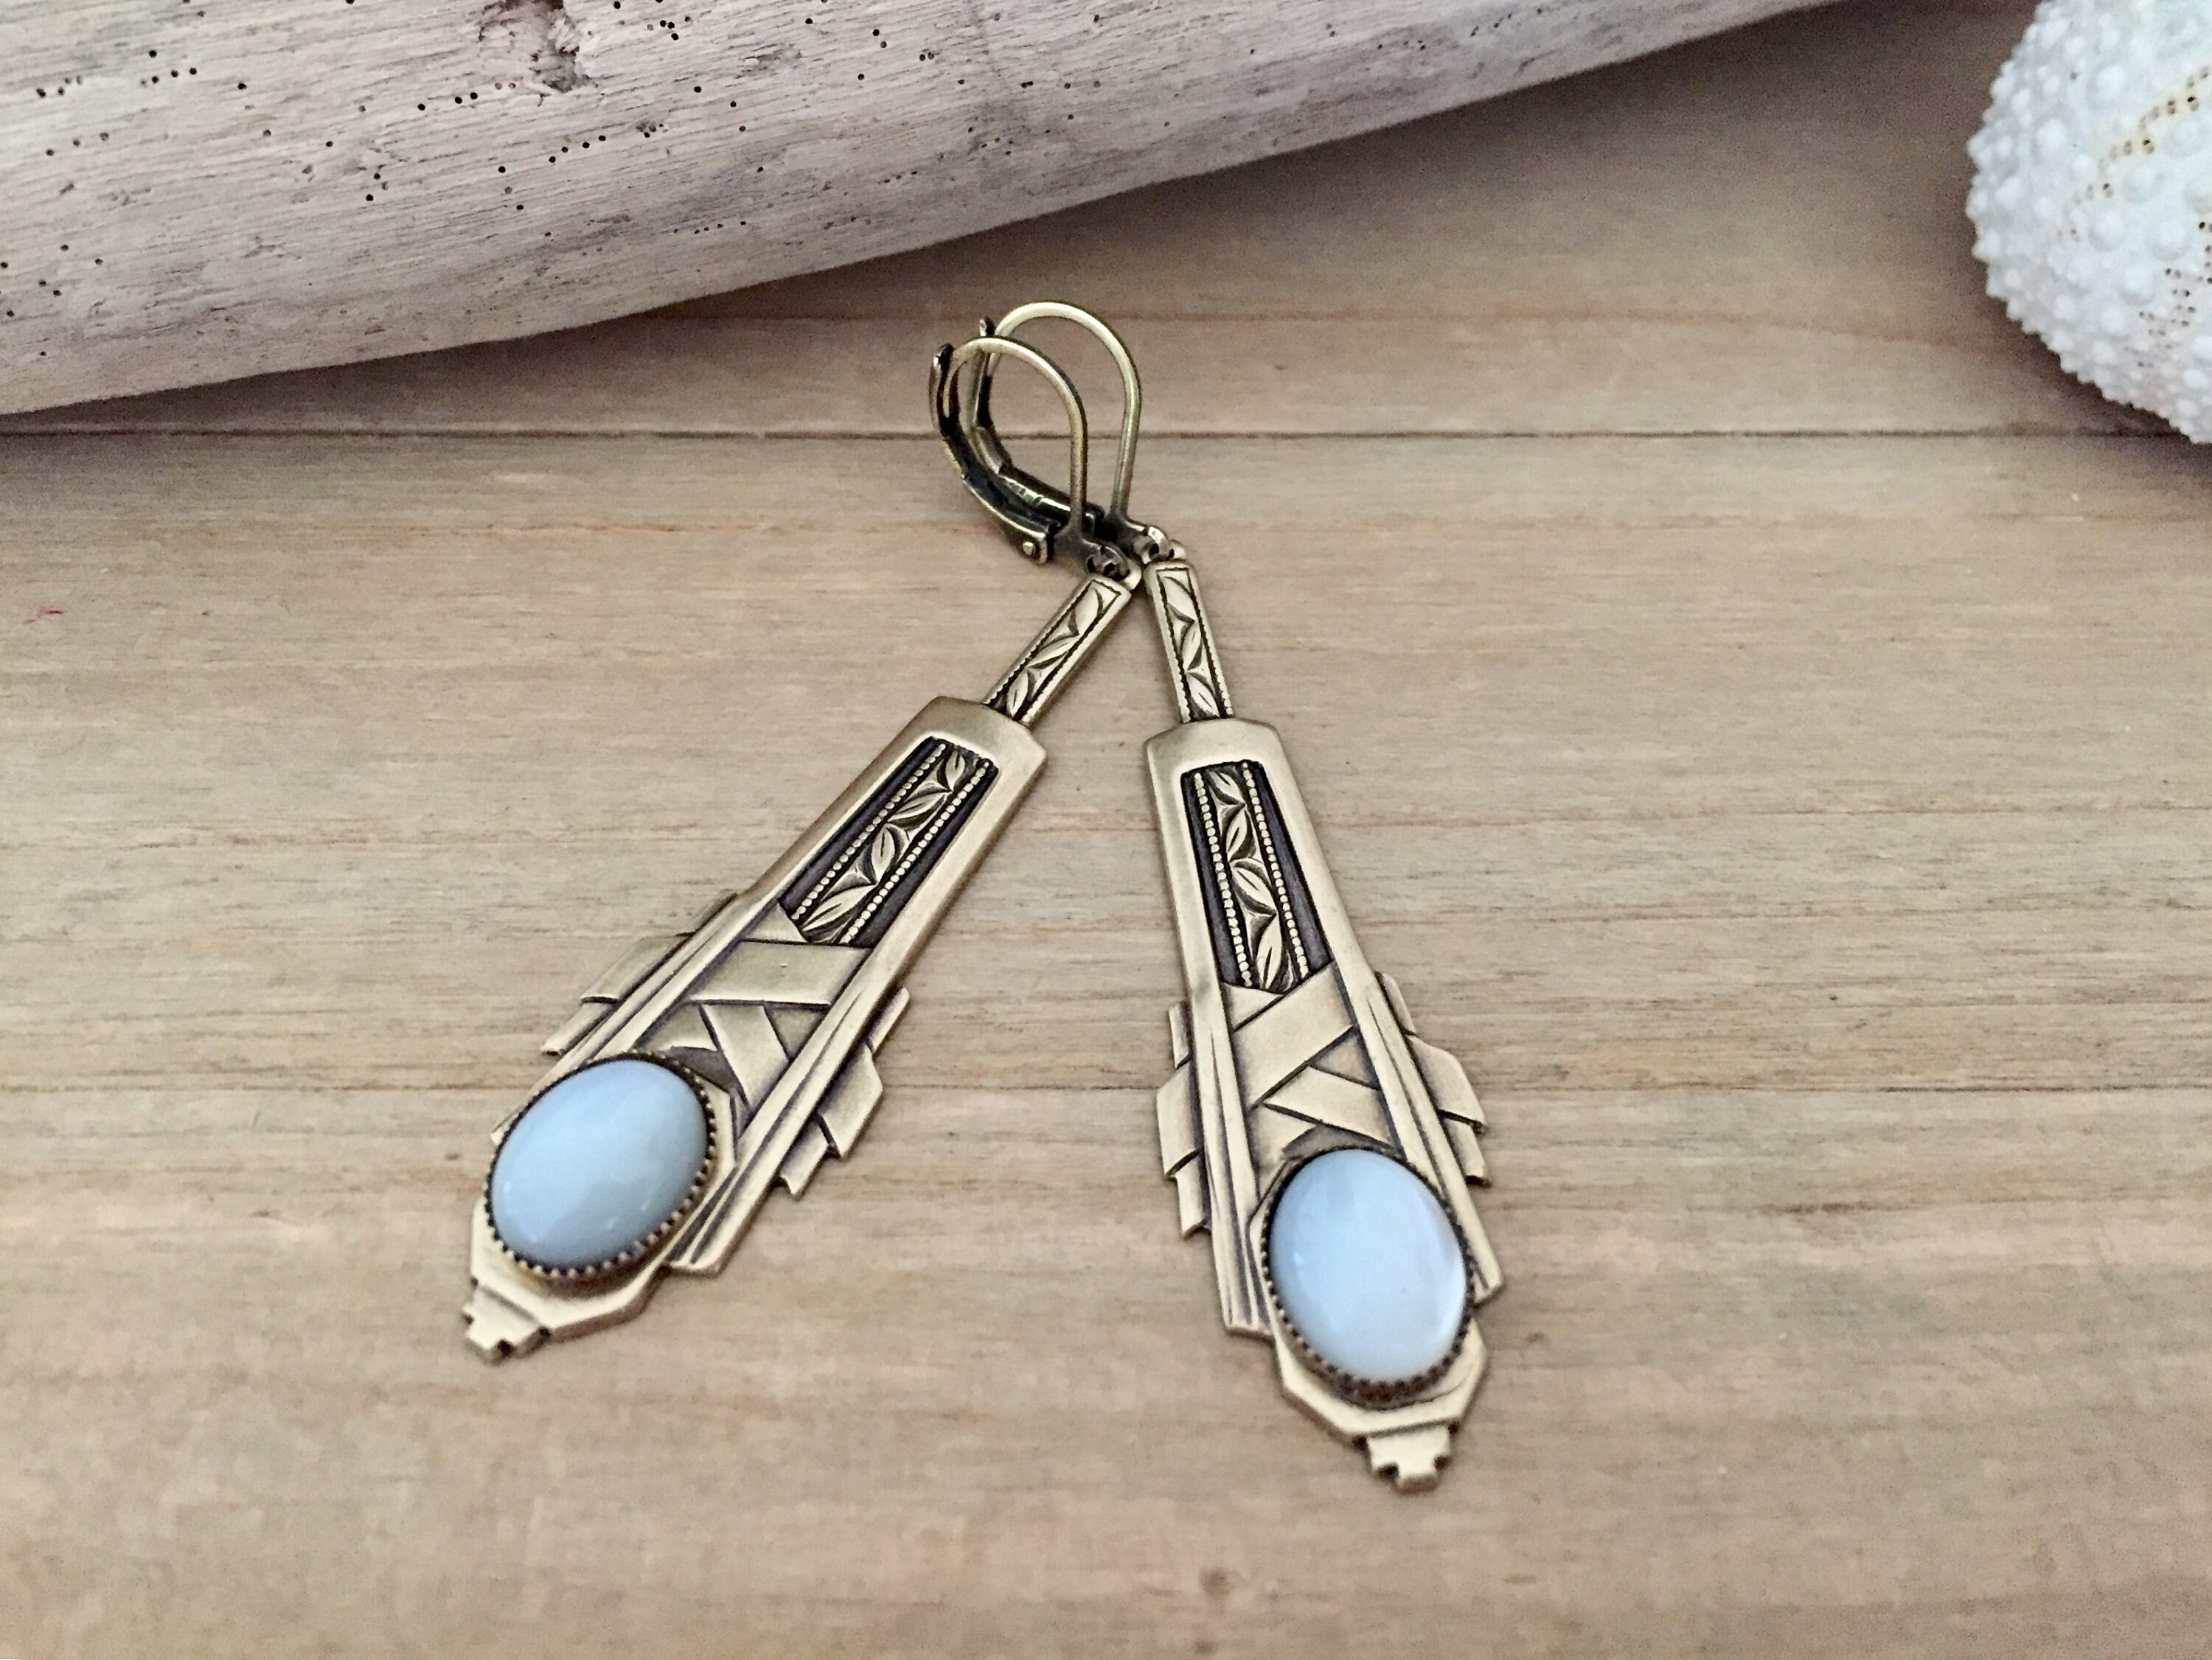 Ines Art Deco earrings featuring mother-of-pearl cabochon and sterling silver lever backs